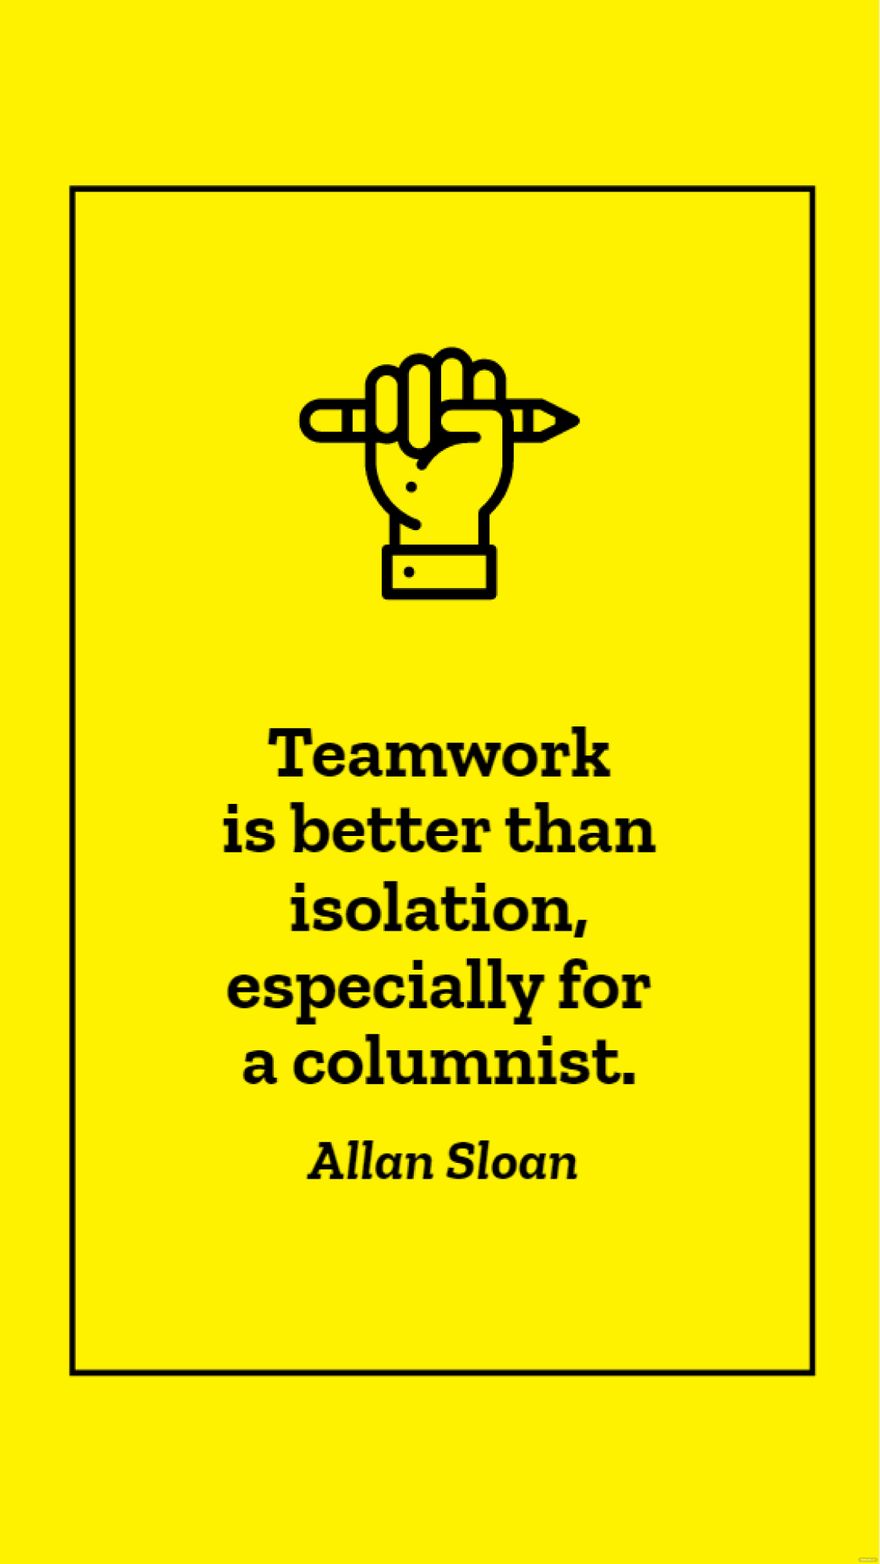 Free Allan Sloan - Teamwork is better than isolation, especially for a columnist.